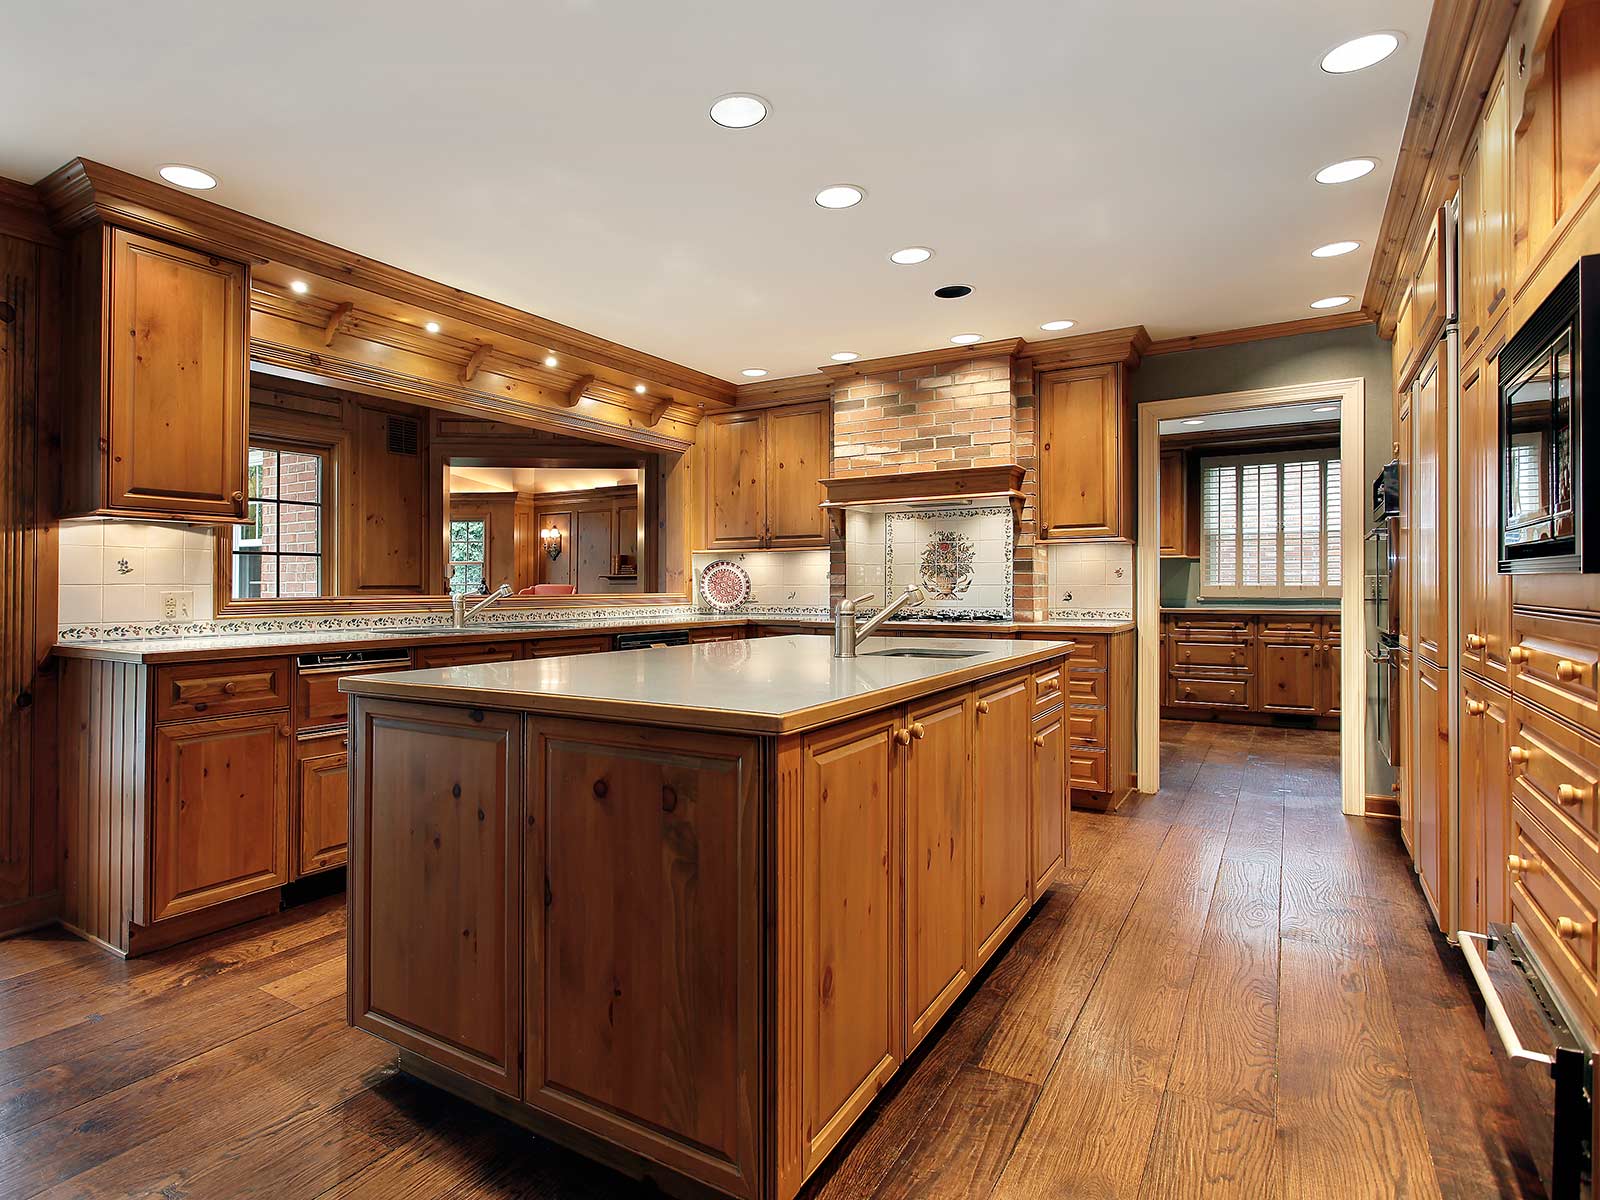 SHB beautiful traditional kitchens with modern features